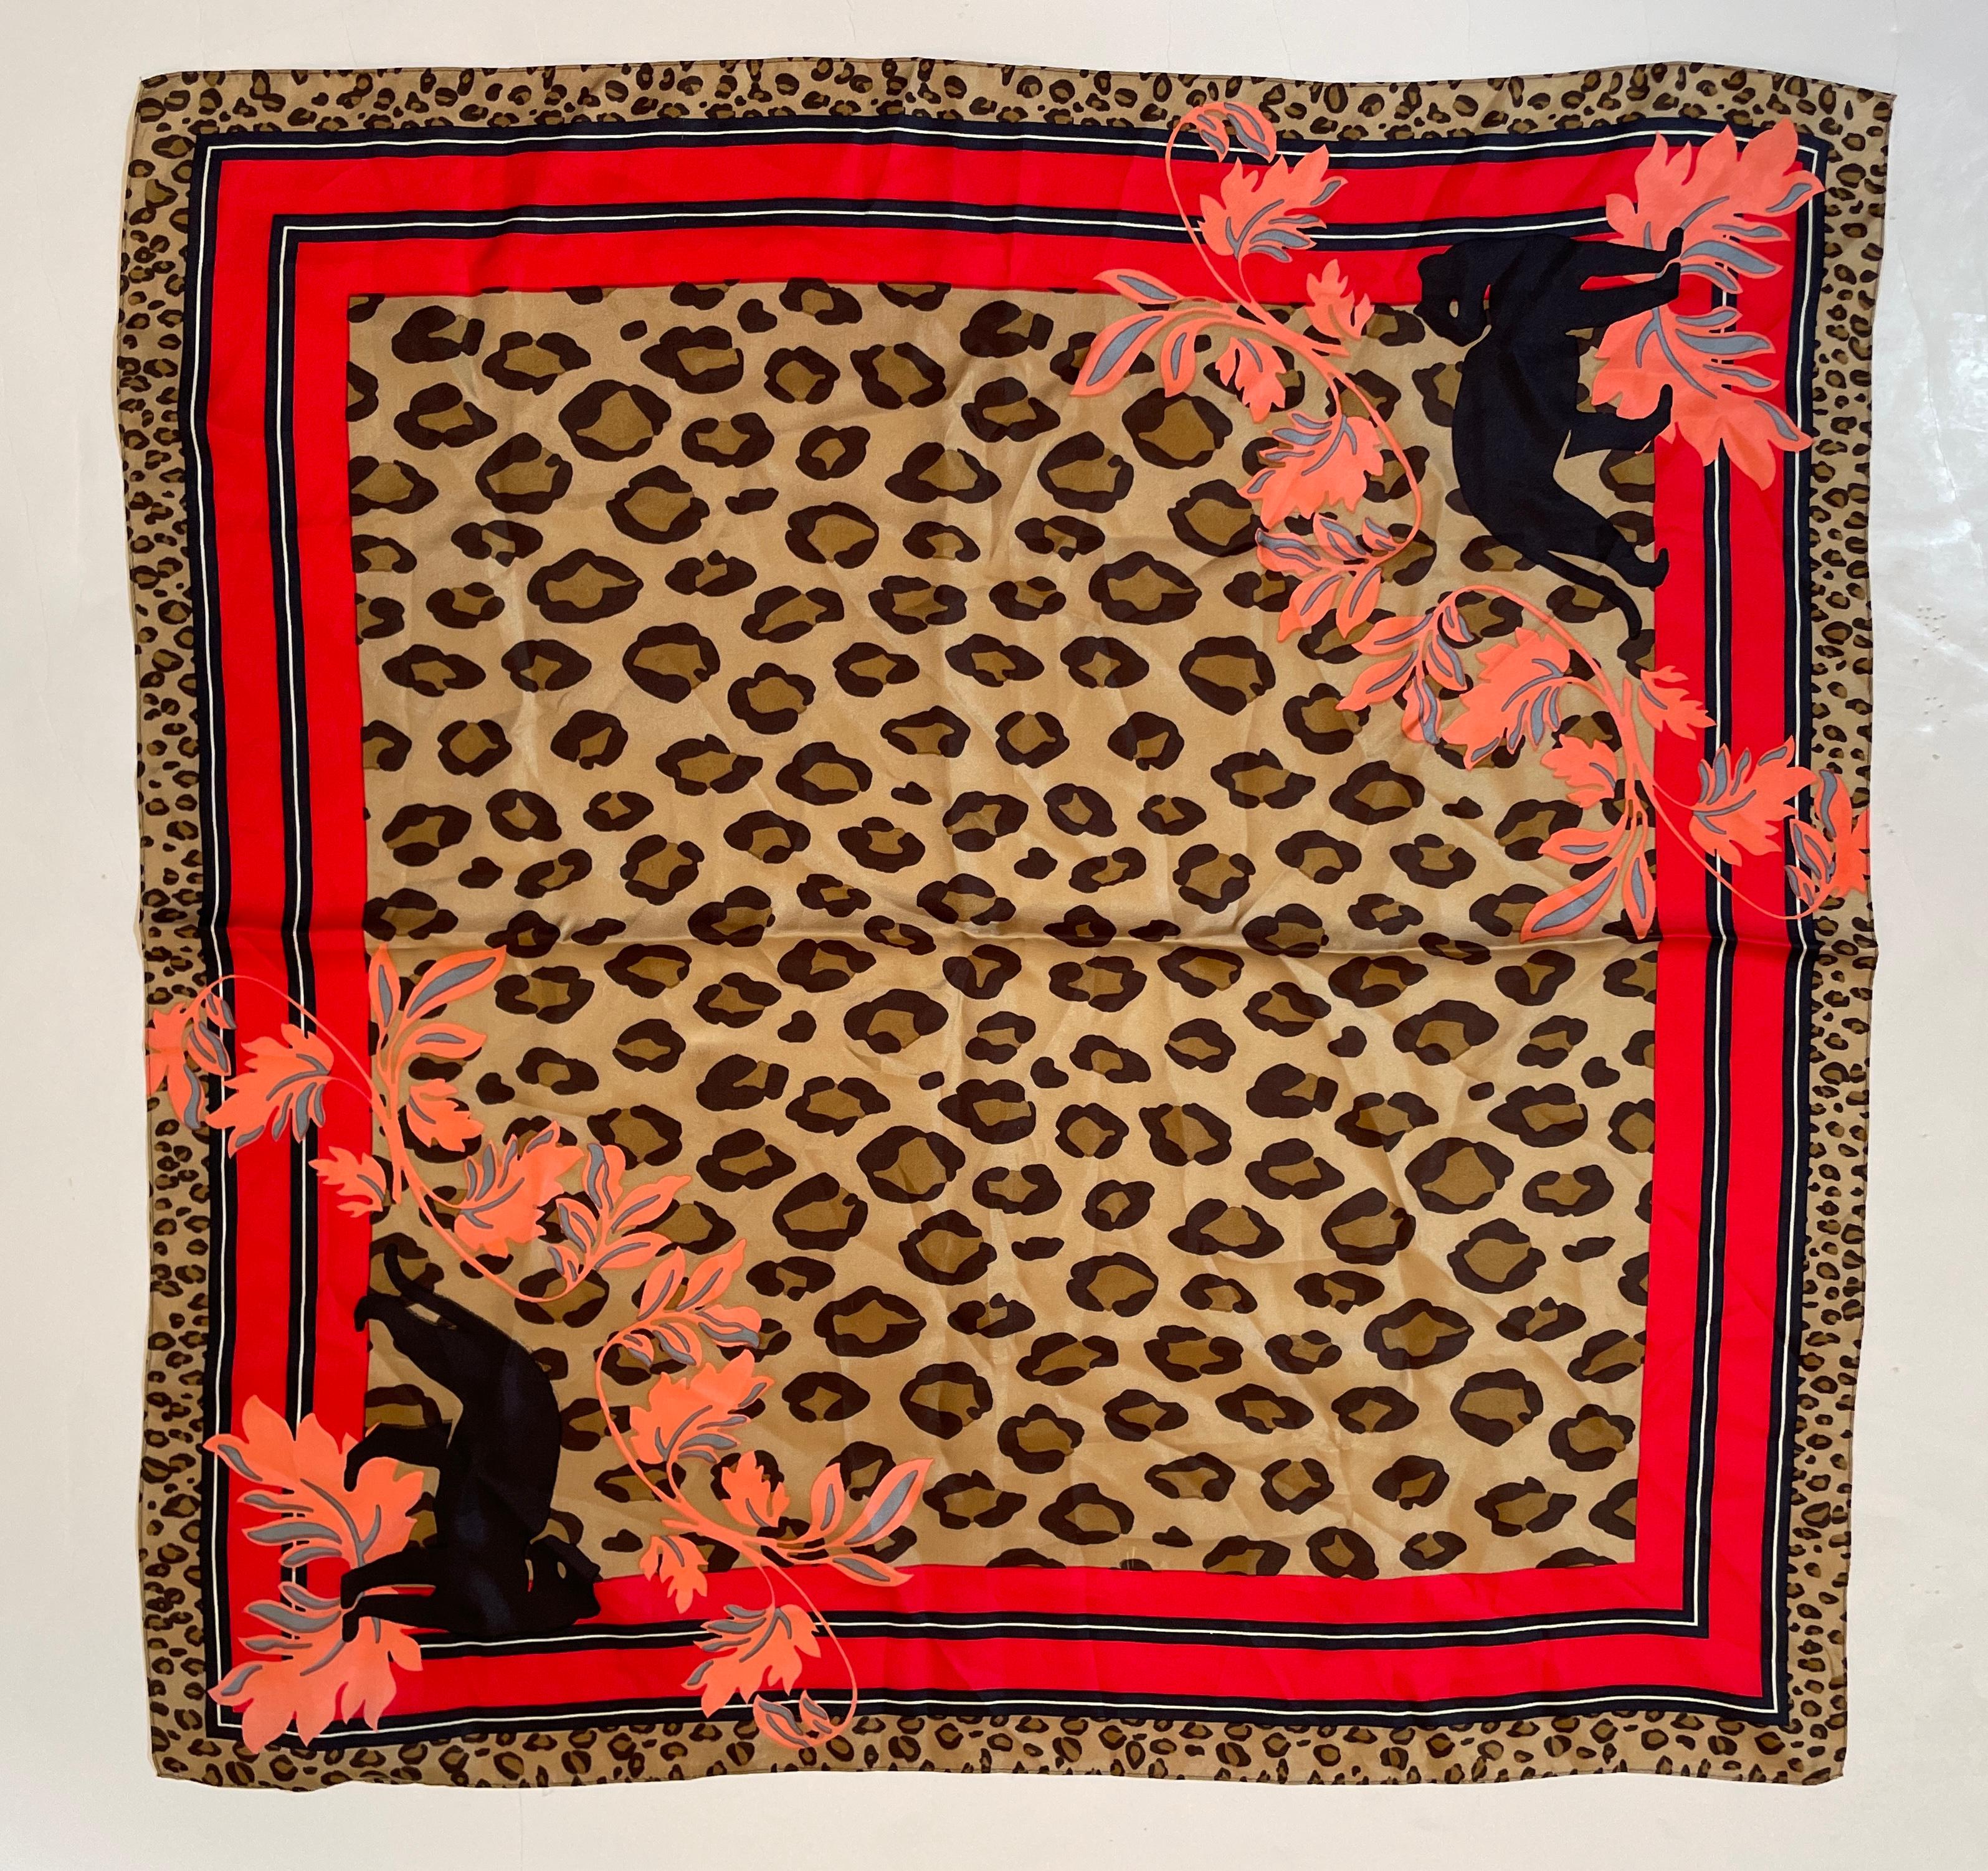 Vintage Anne Klein ‘Leopard Print Silk Scarf.
Leopard Animal Print Silk Scarf by Anne Klein.
Was designed by Anne Klein. 
The center design highlights the leopard’s fur with pale yellowish to dark golden with dark spots. 
Framing the center is a